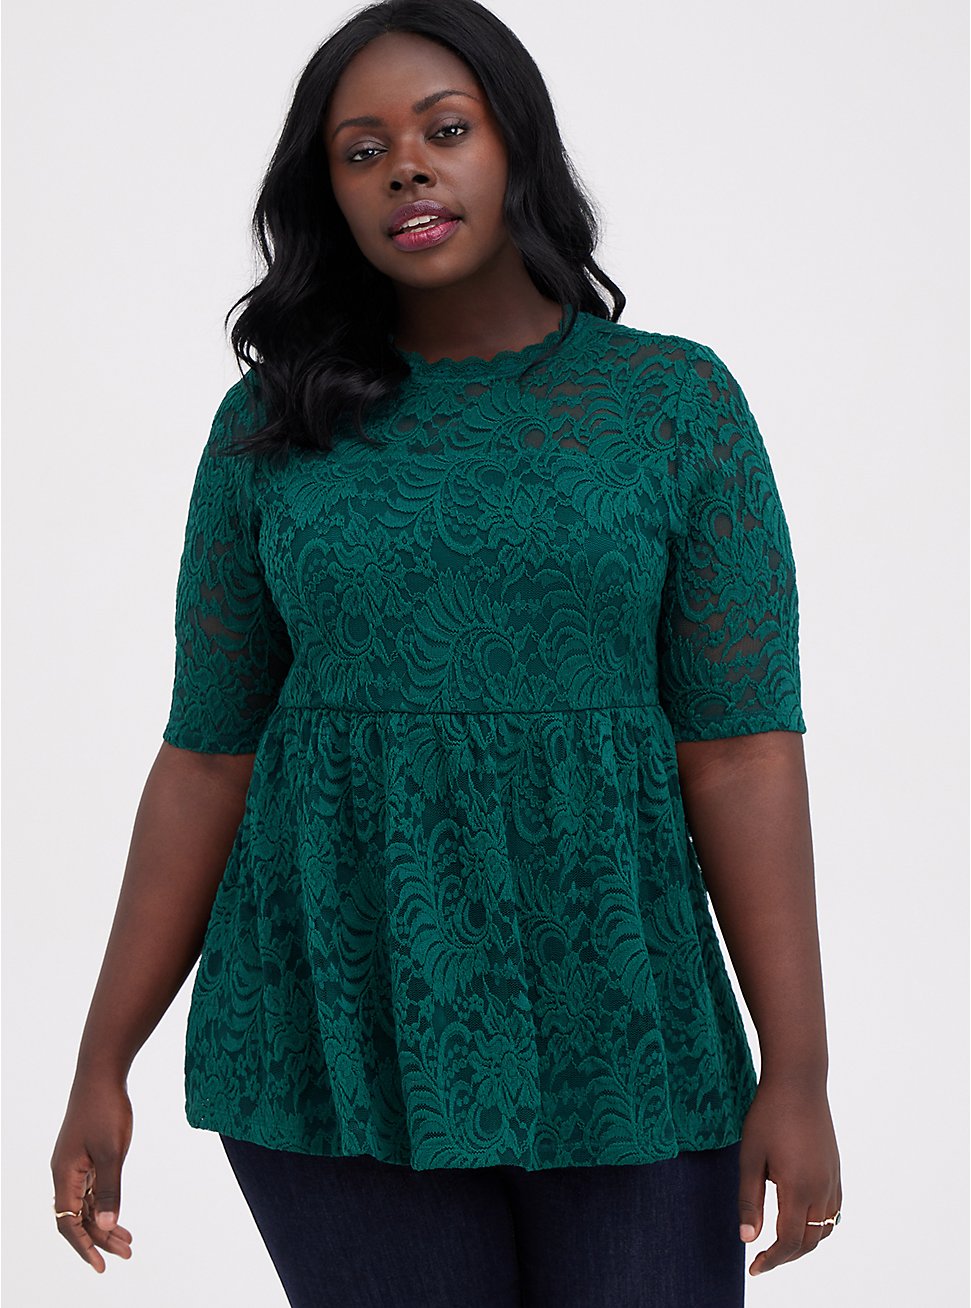 Plus Size Babydoll Top - Lace Green, GREEN, hi-res